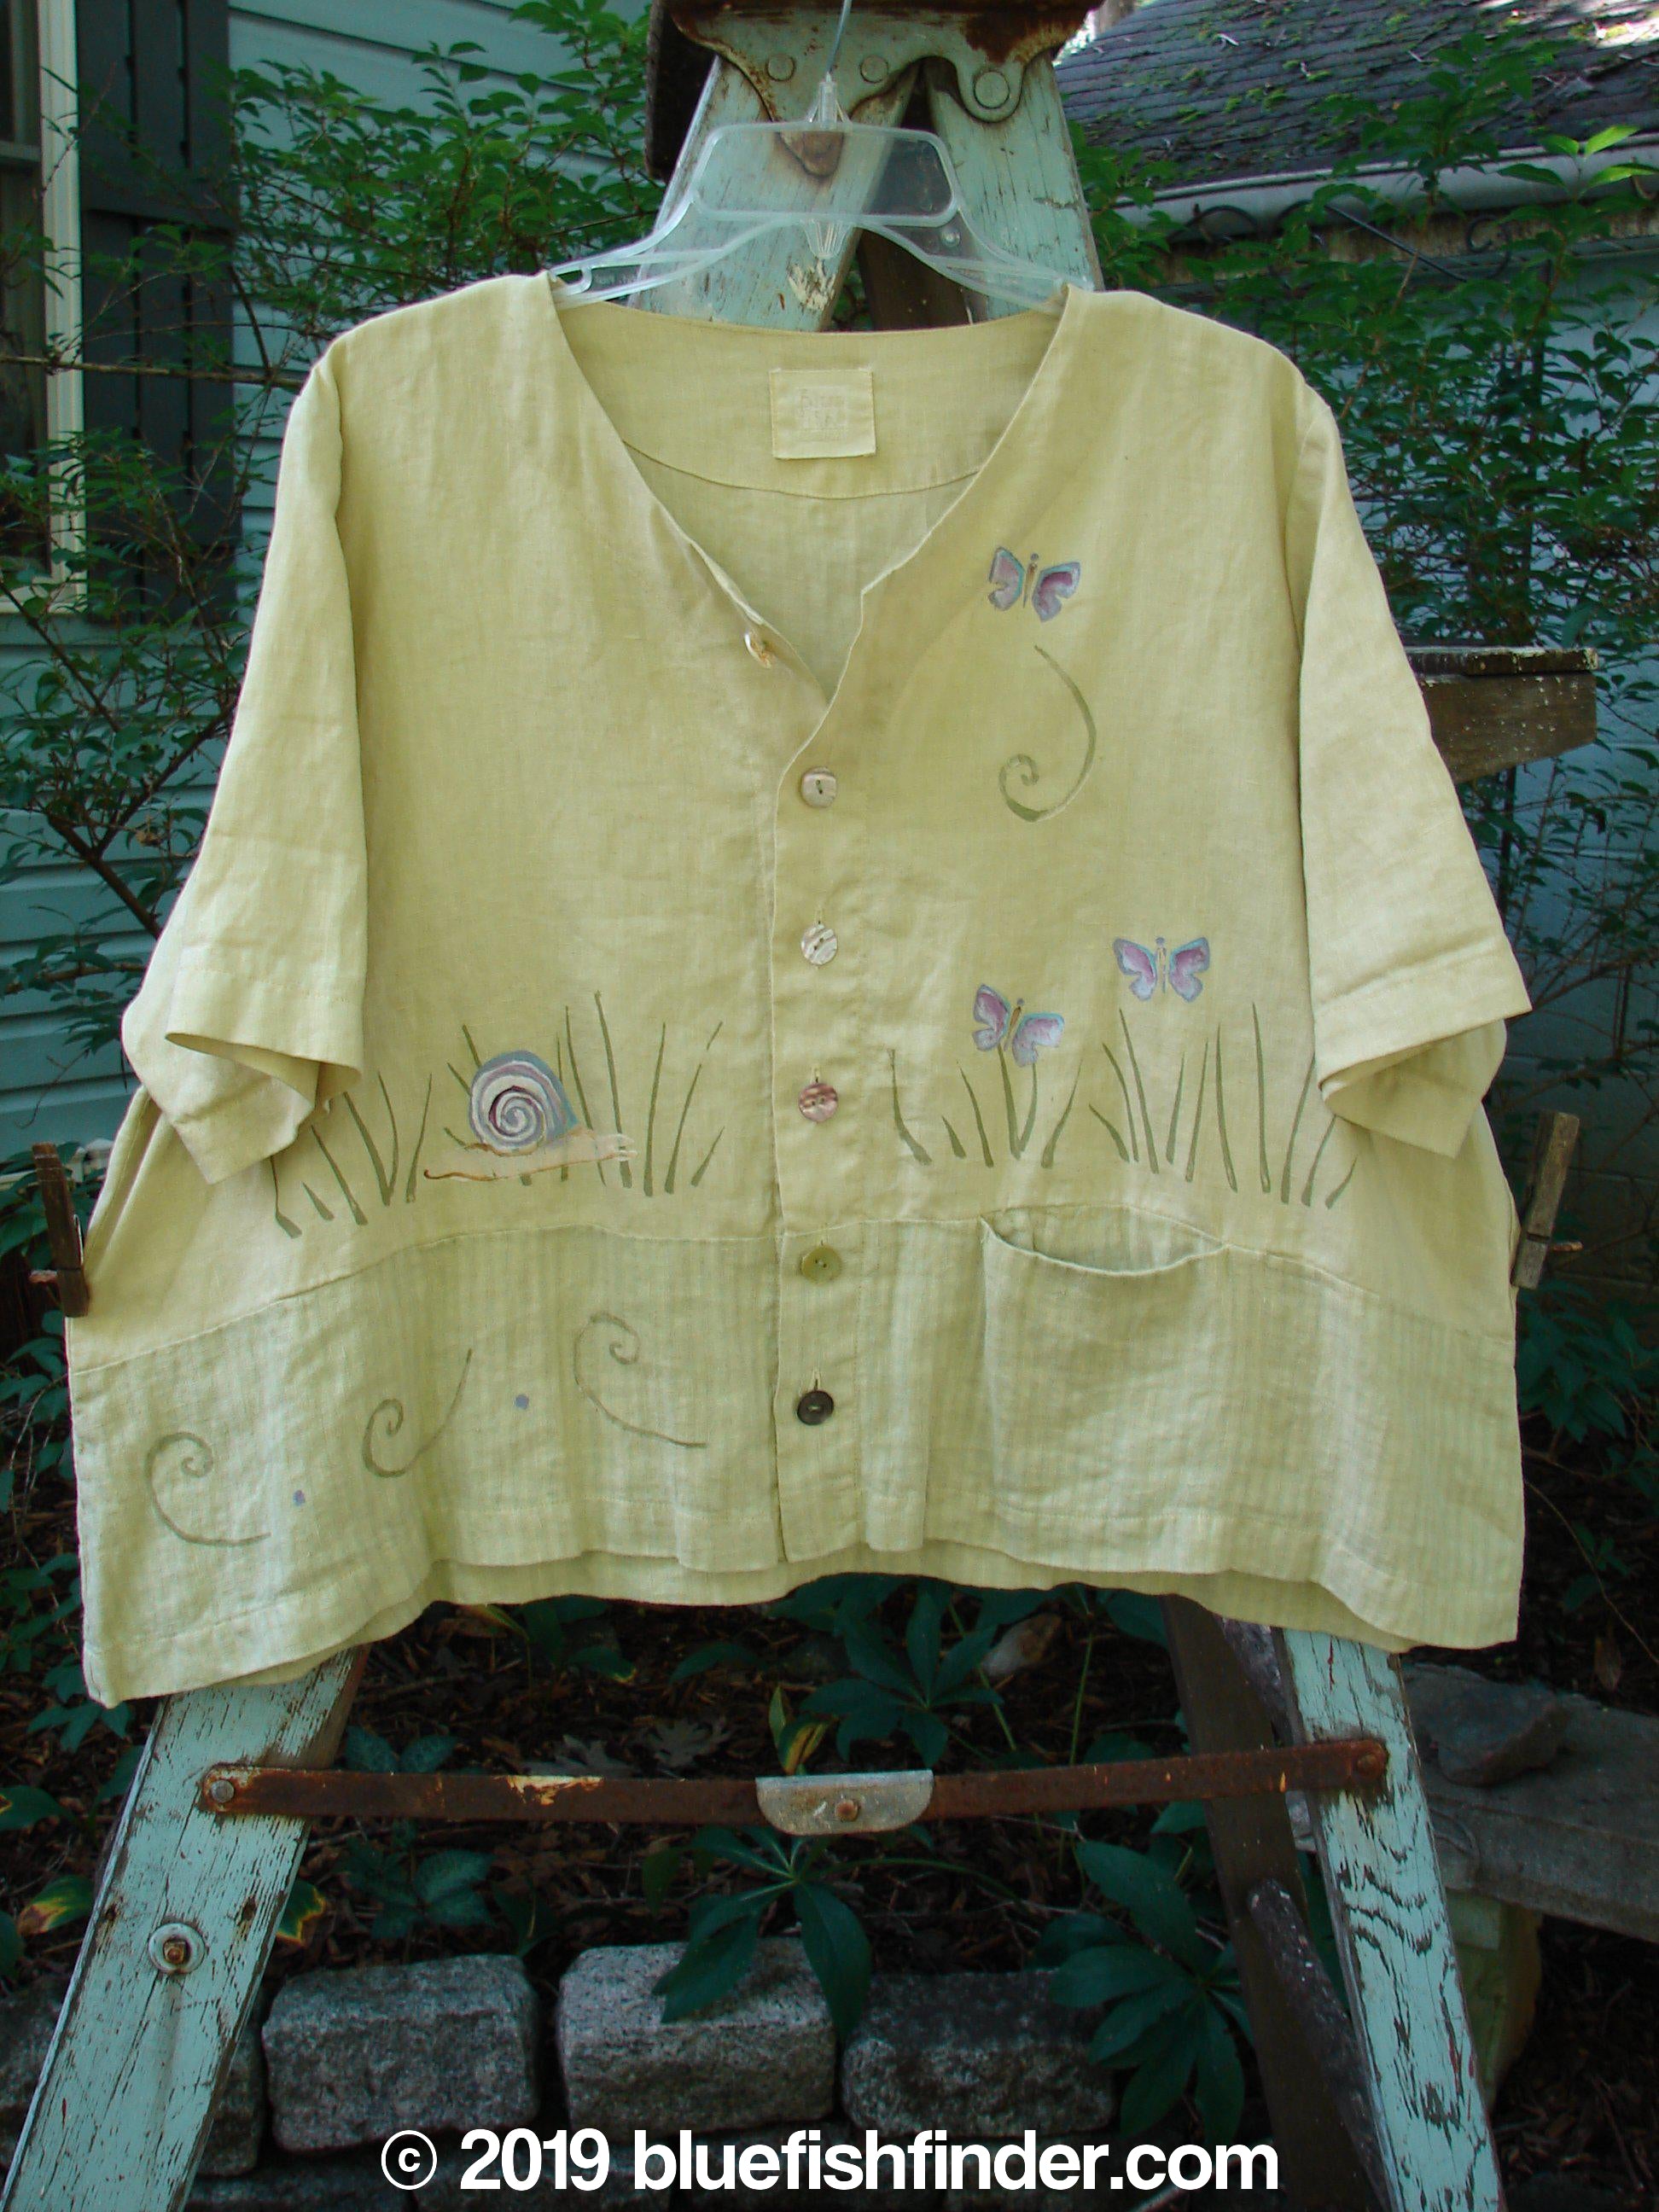 1999 Cabana Top with butterflies and snails painted on it, made from light textured linen. Features include a crop shape, shell buttons, varying hemline, and a contrasting fabric lower panel. Size 2.